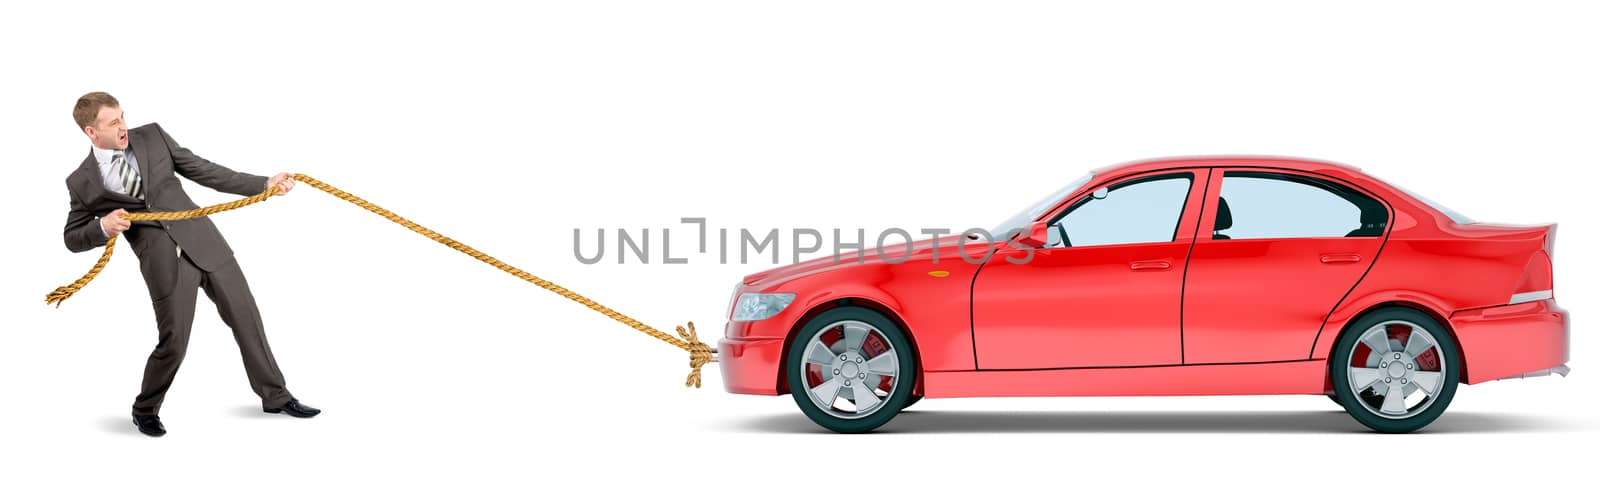 Businessman pulling red car isolated on white background